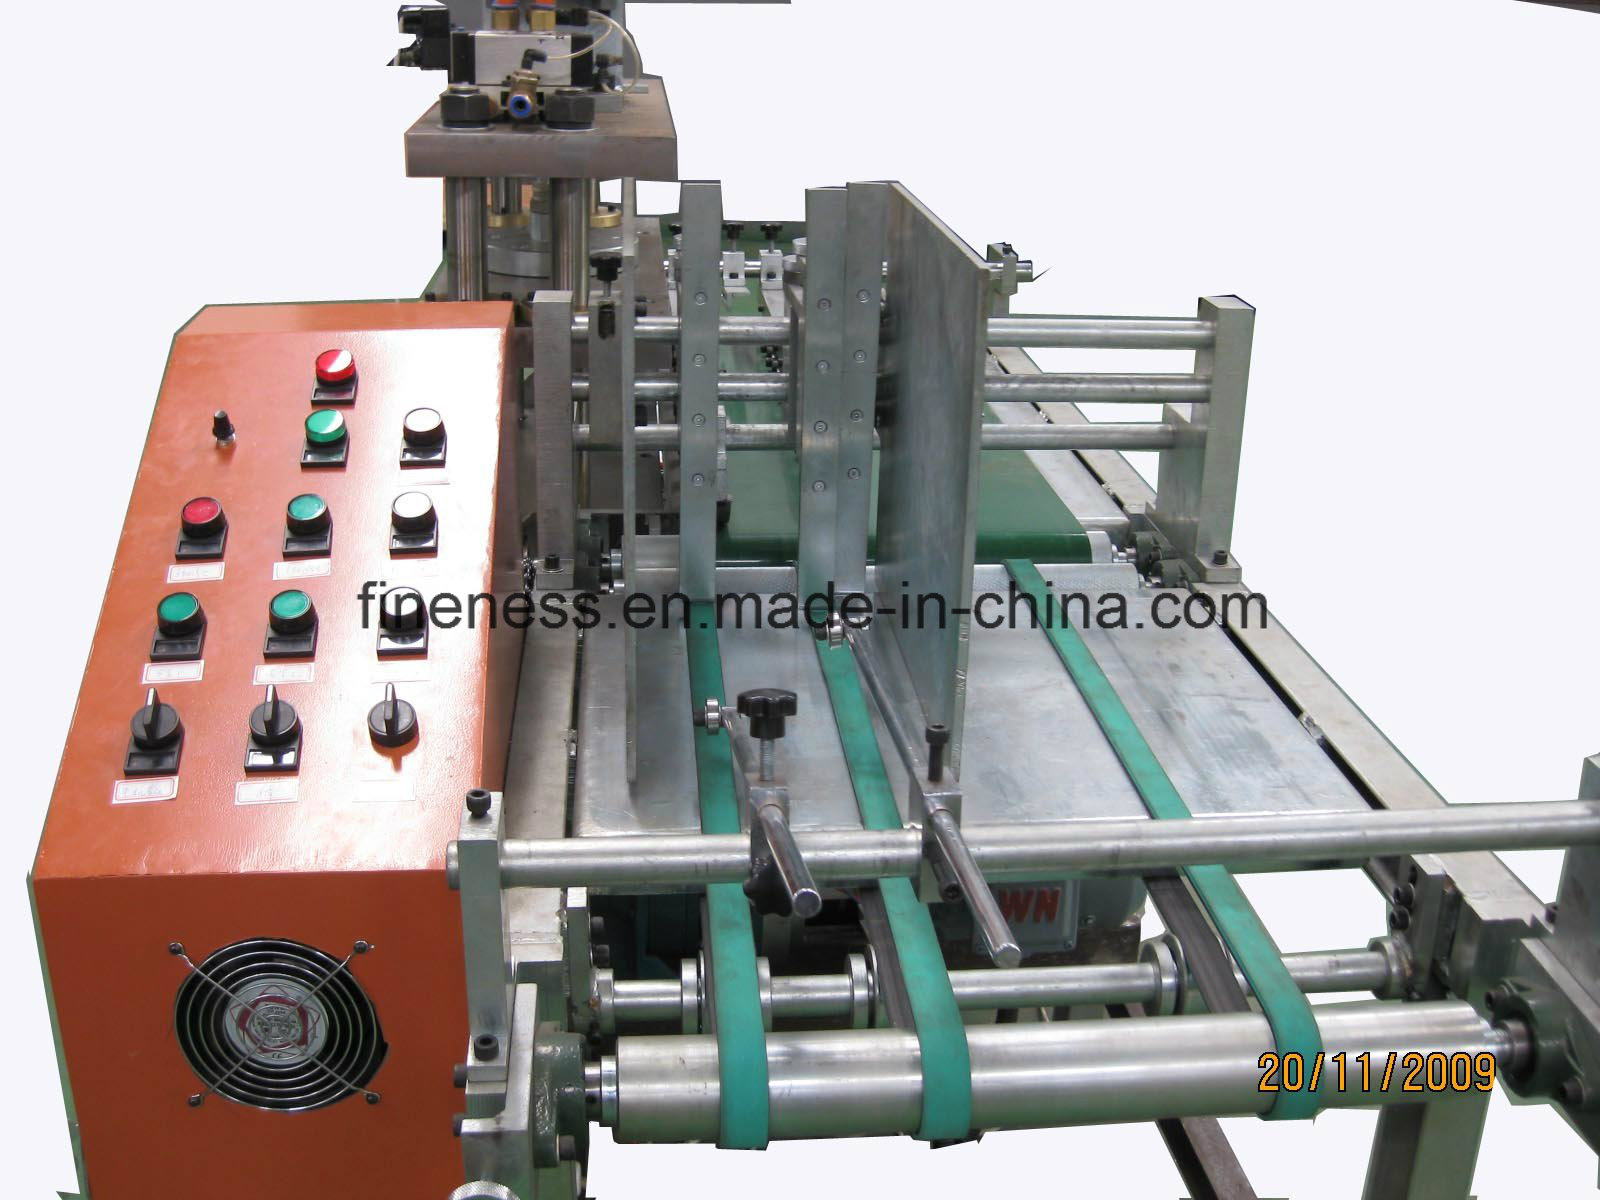 Aluminum Foil Container Making Machine for Food Taking